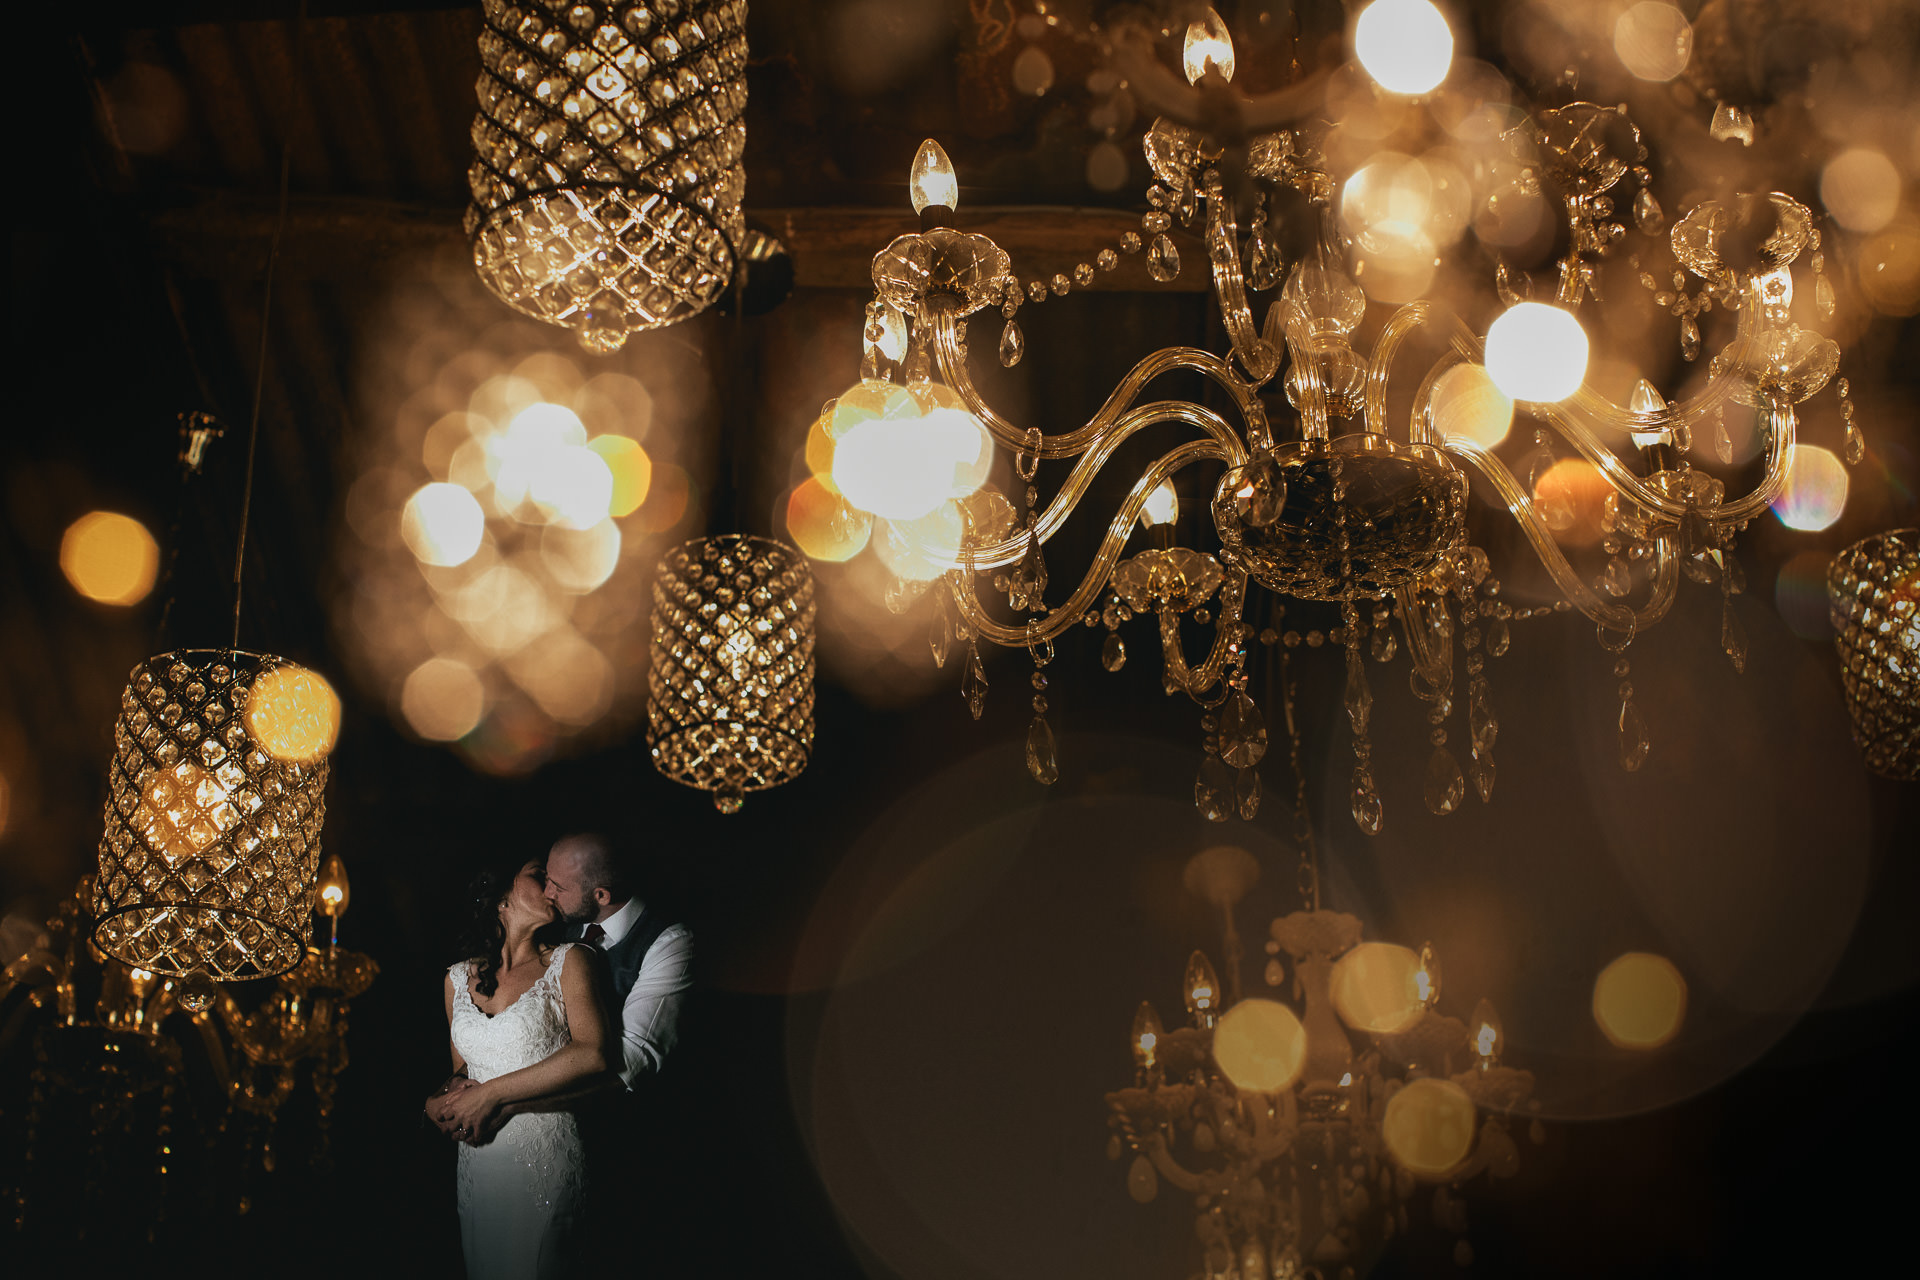 Bride and groom surrounded by chandeliers